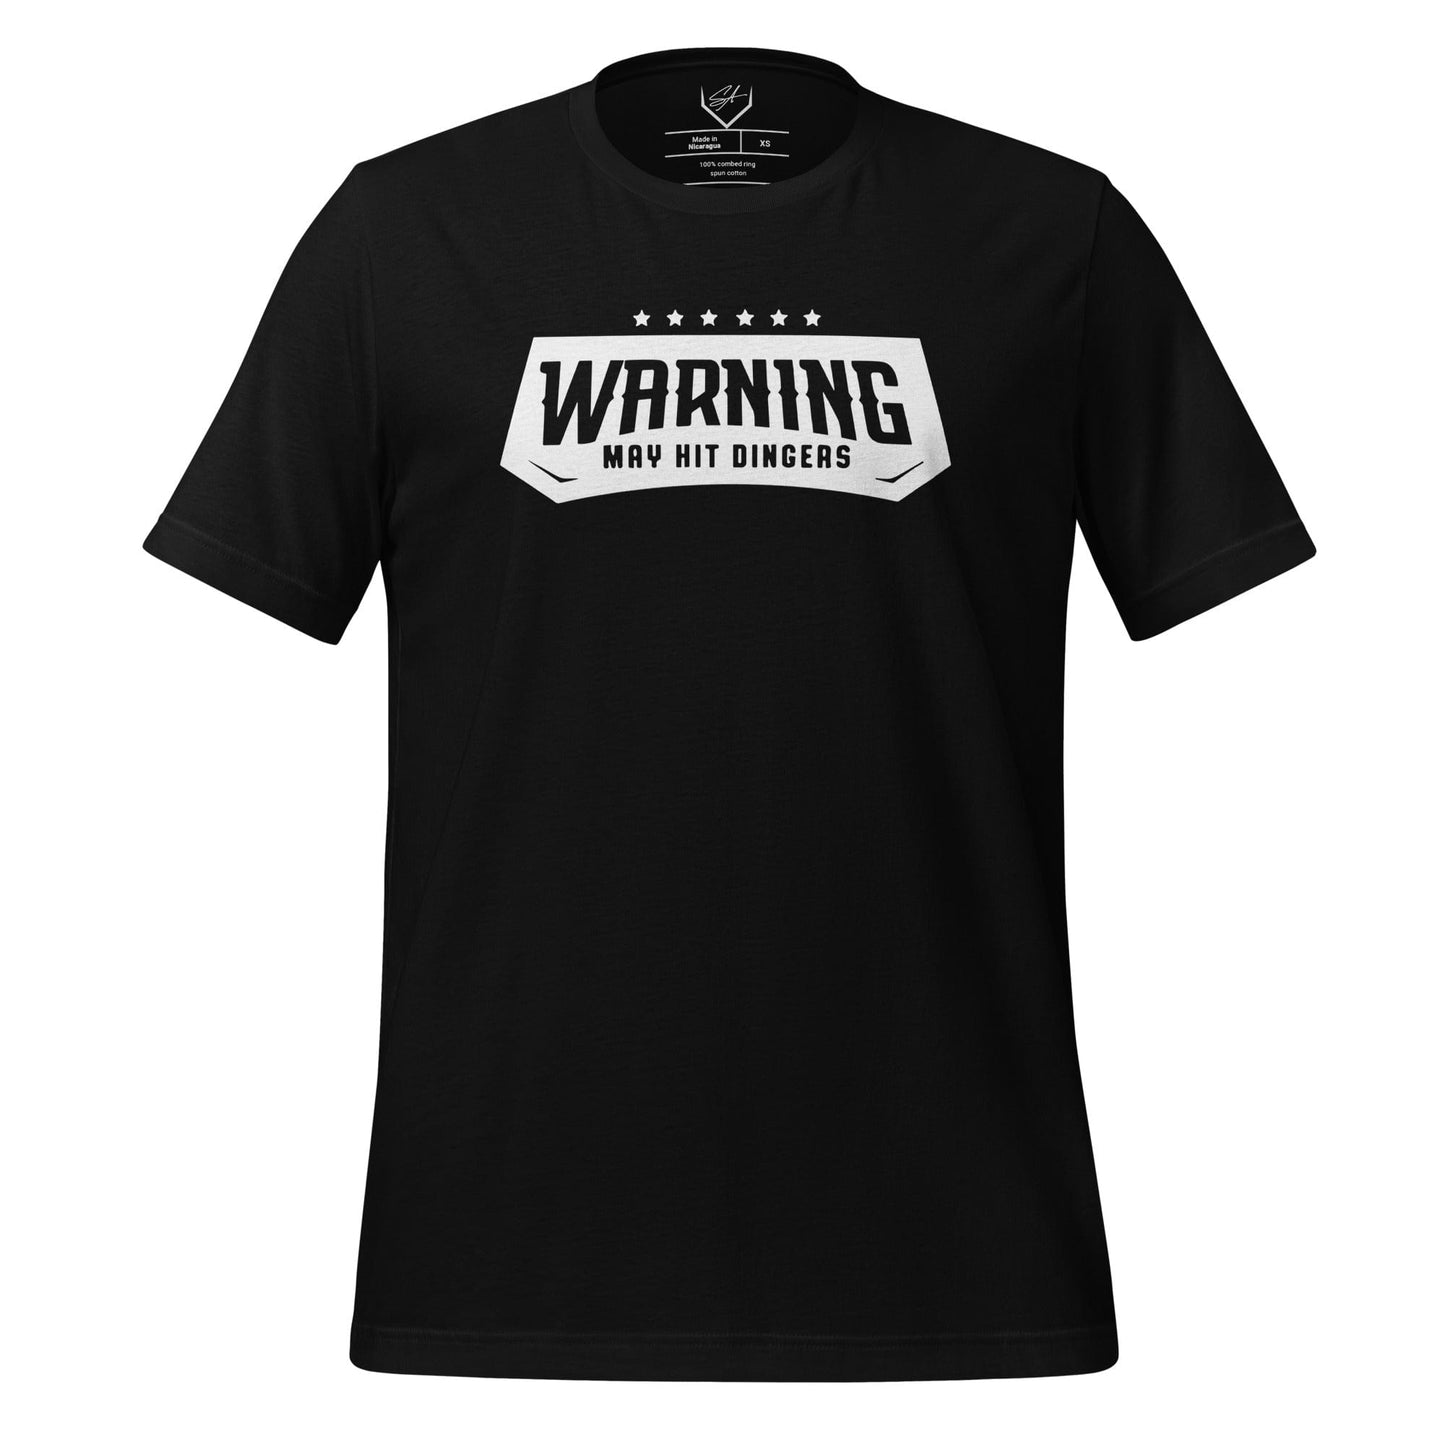 Warning May Hit Dingers - Adult Tee